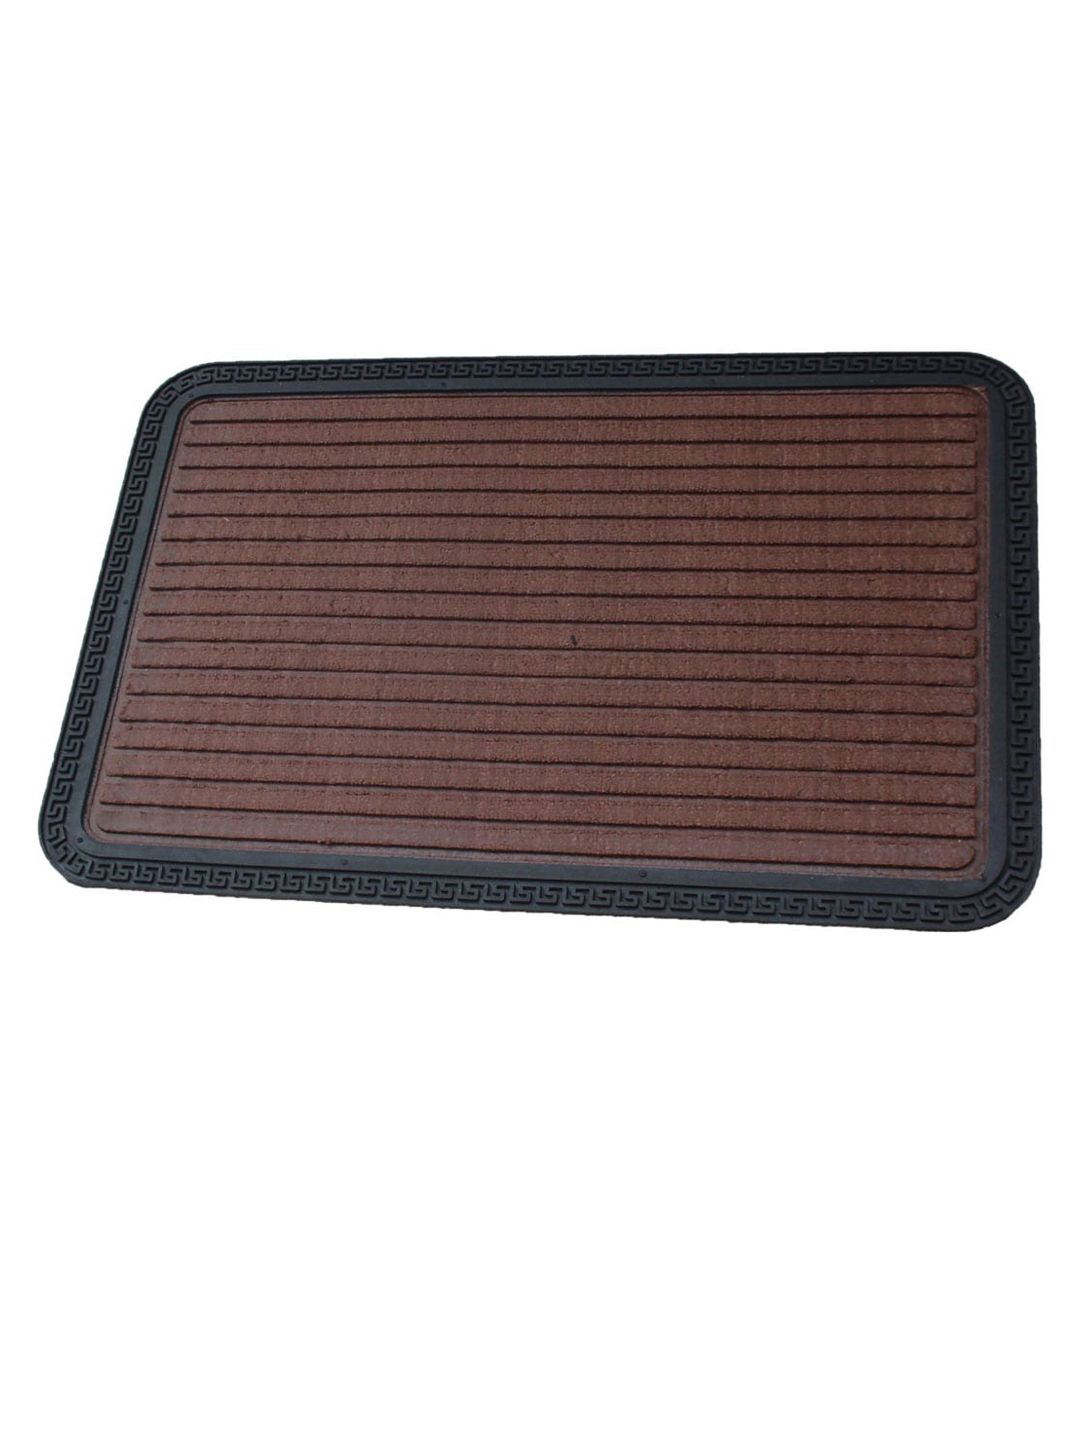 LUXEHOME INTERNATIONAL Brown Striped Doormat Price in India